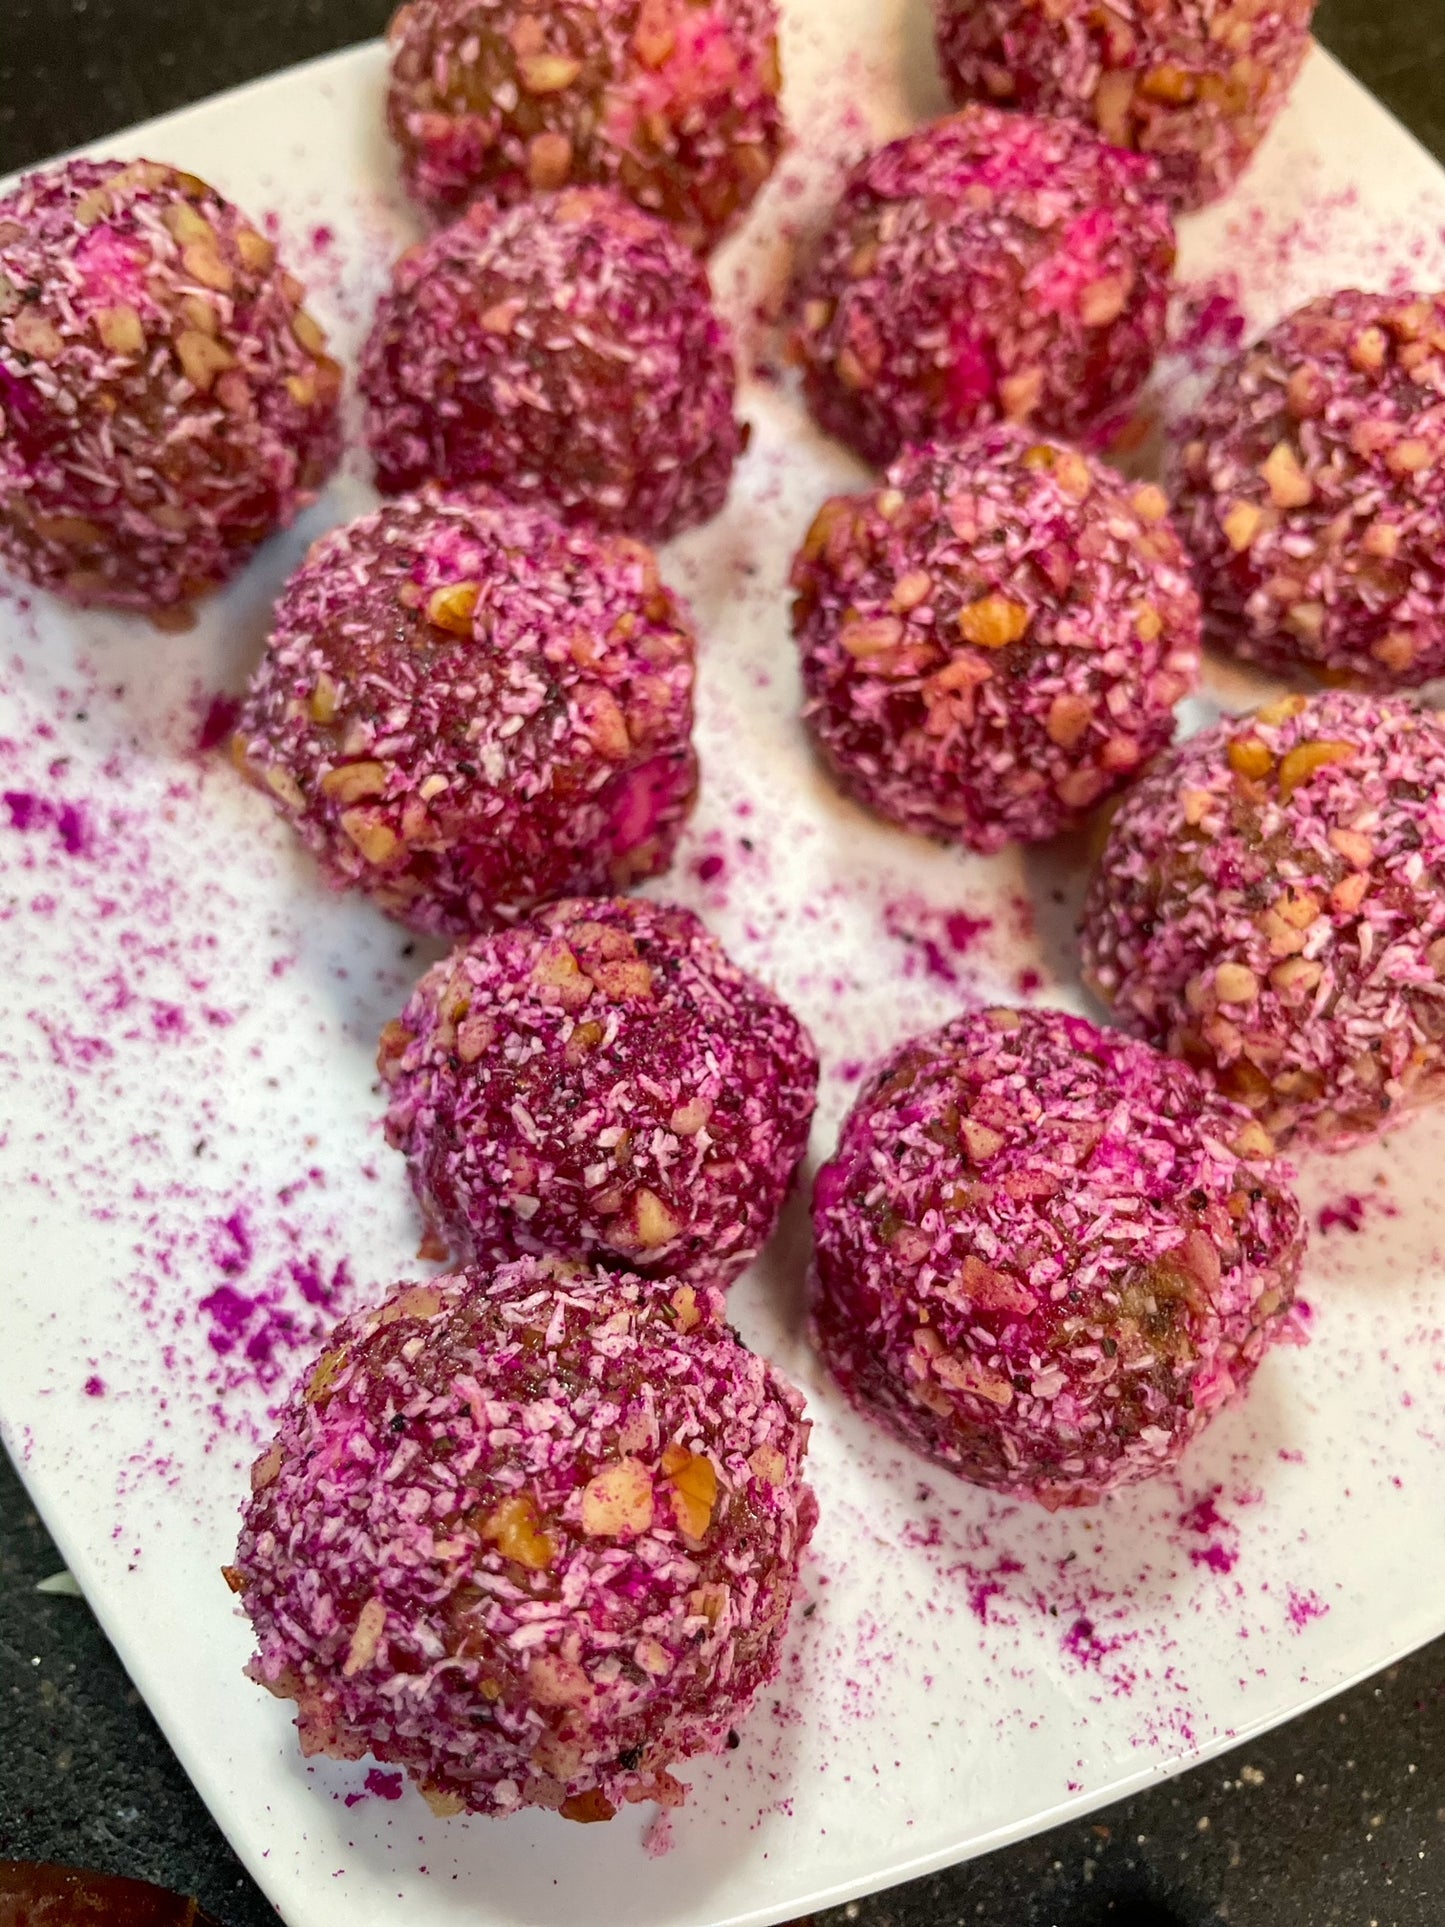 Pitaya and Protein Date Balls on Deck